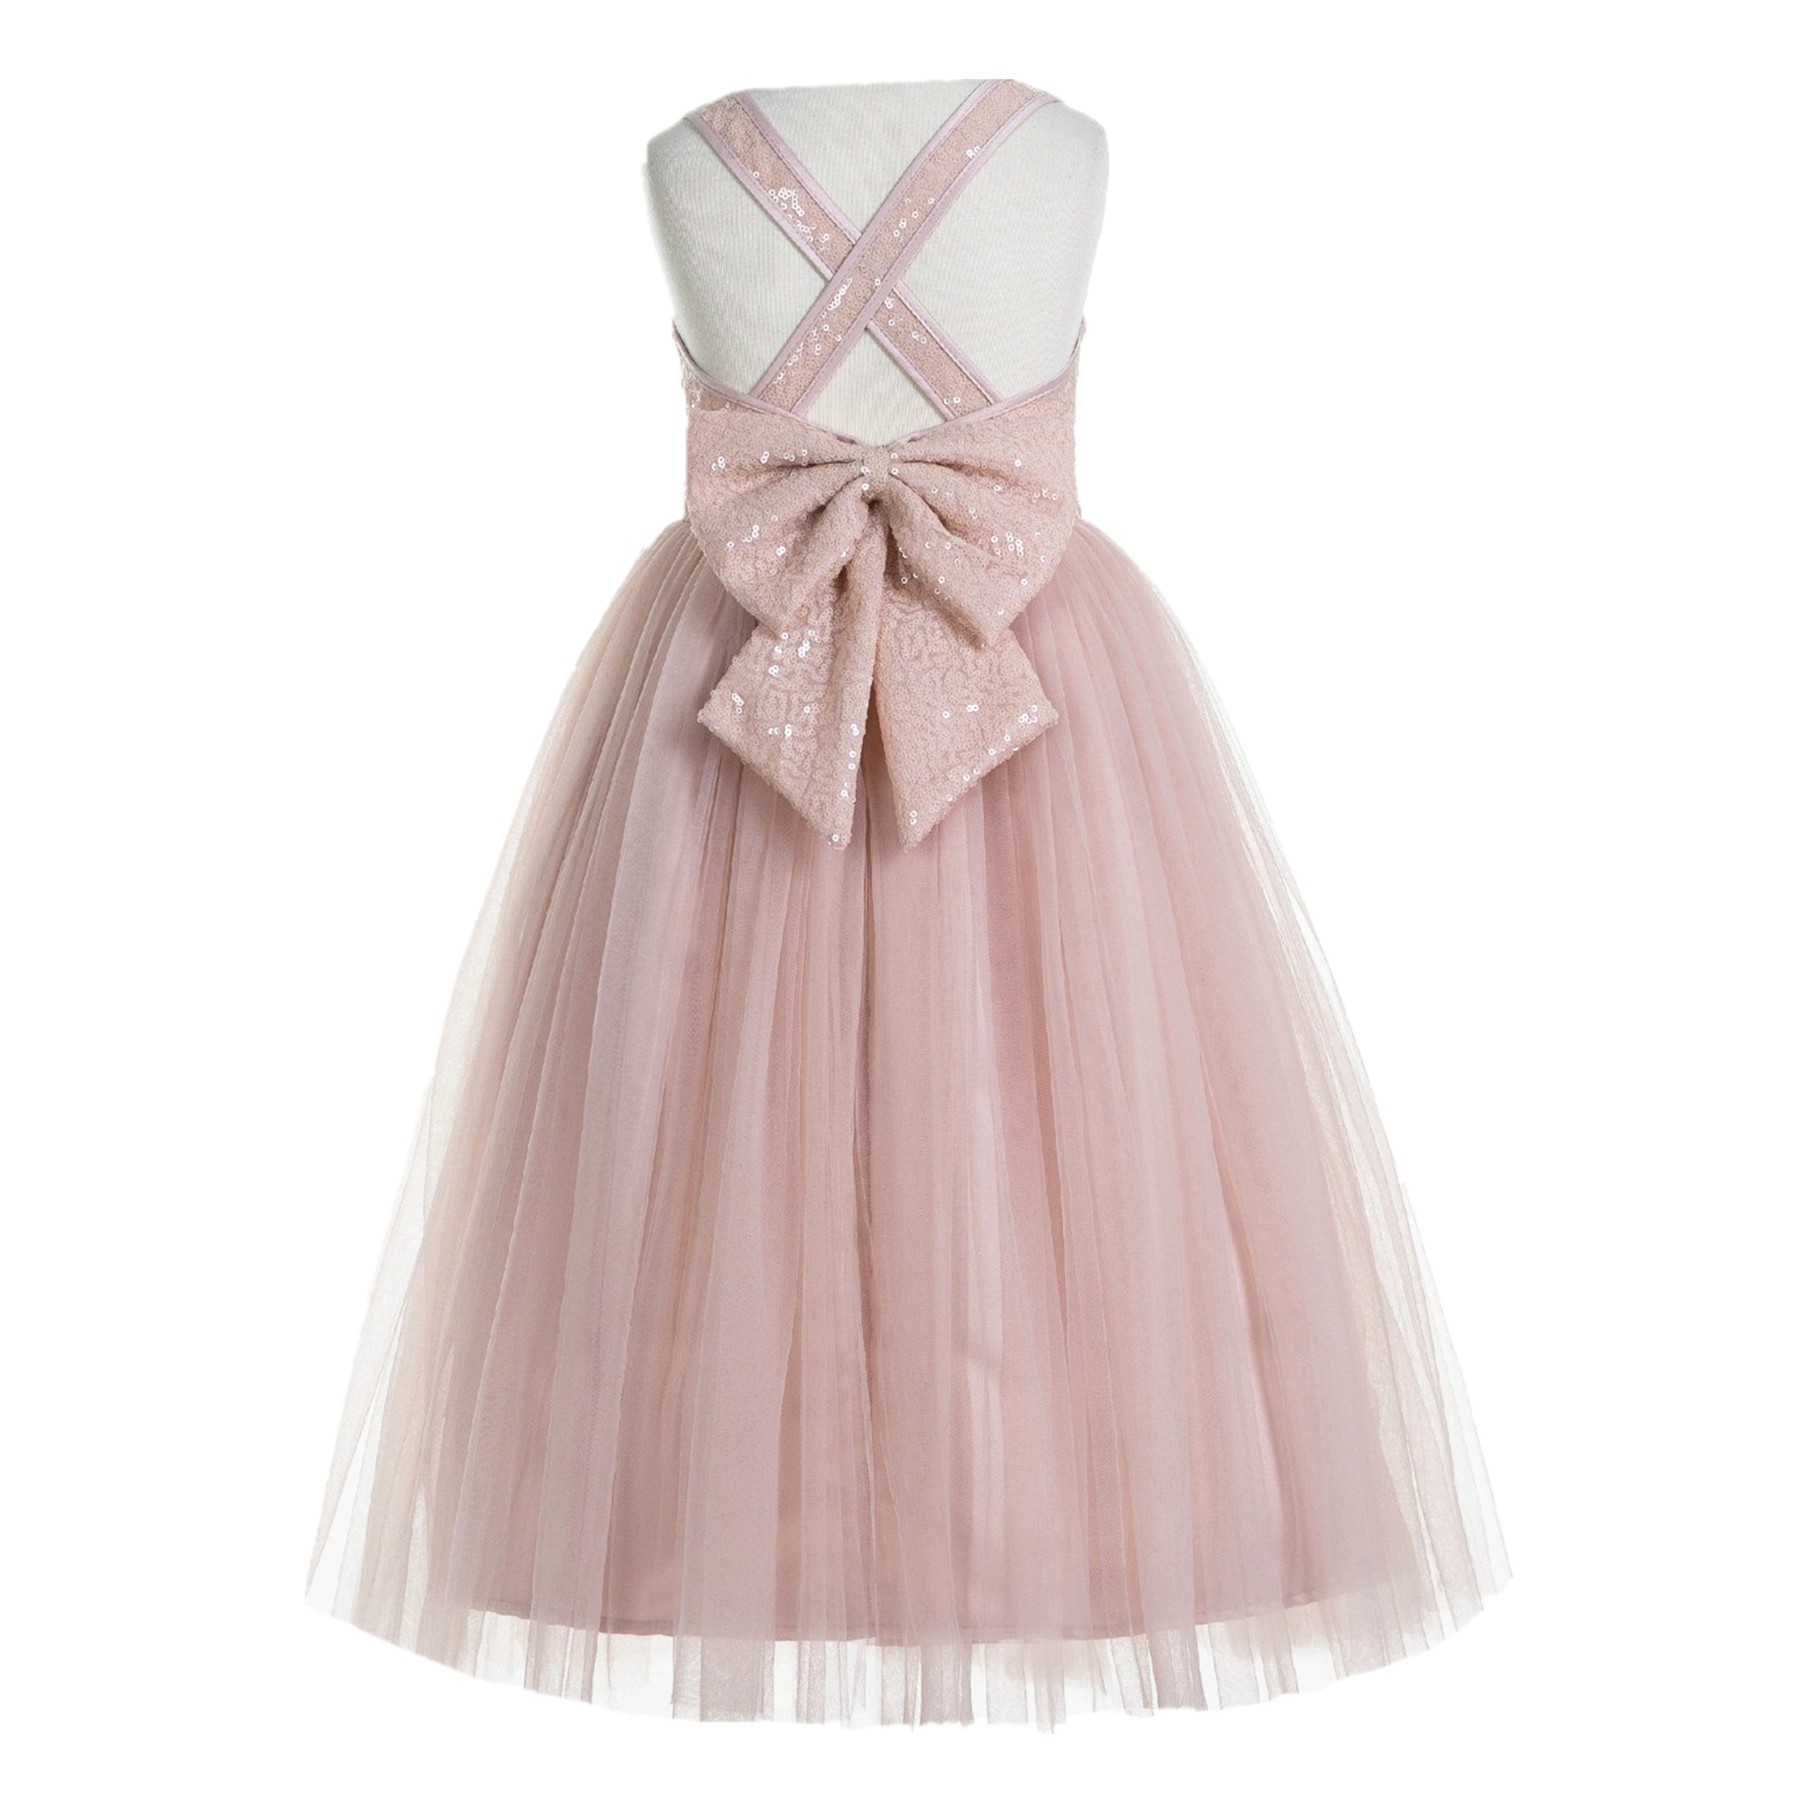 Blush Pink Crossed Straps A-Line Flower Girl Dress 177 - Sequin Bow ...